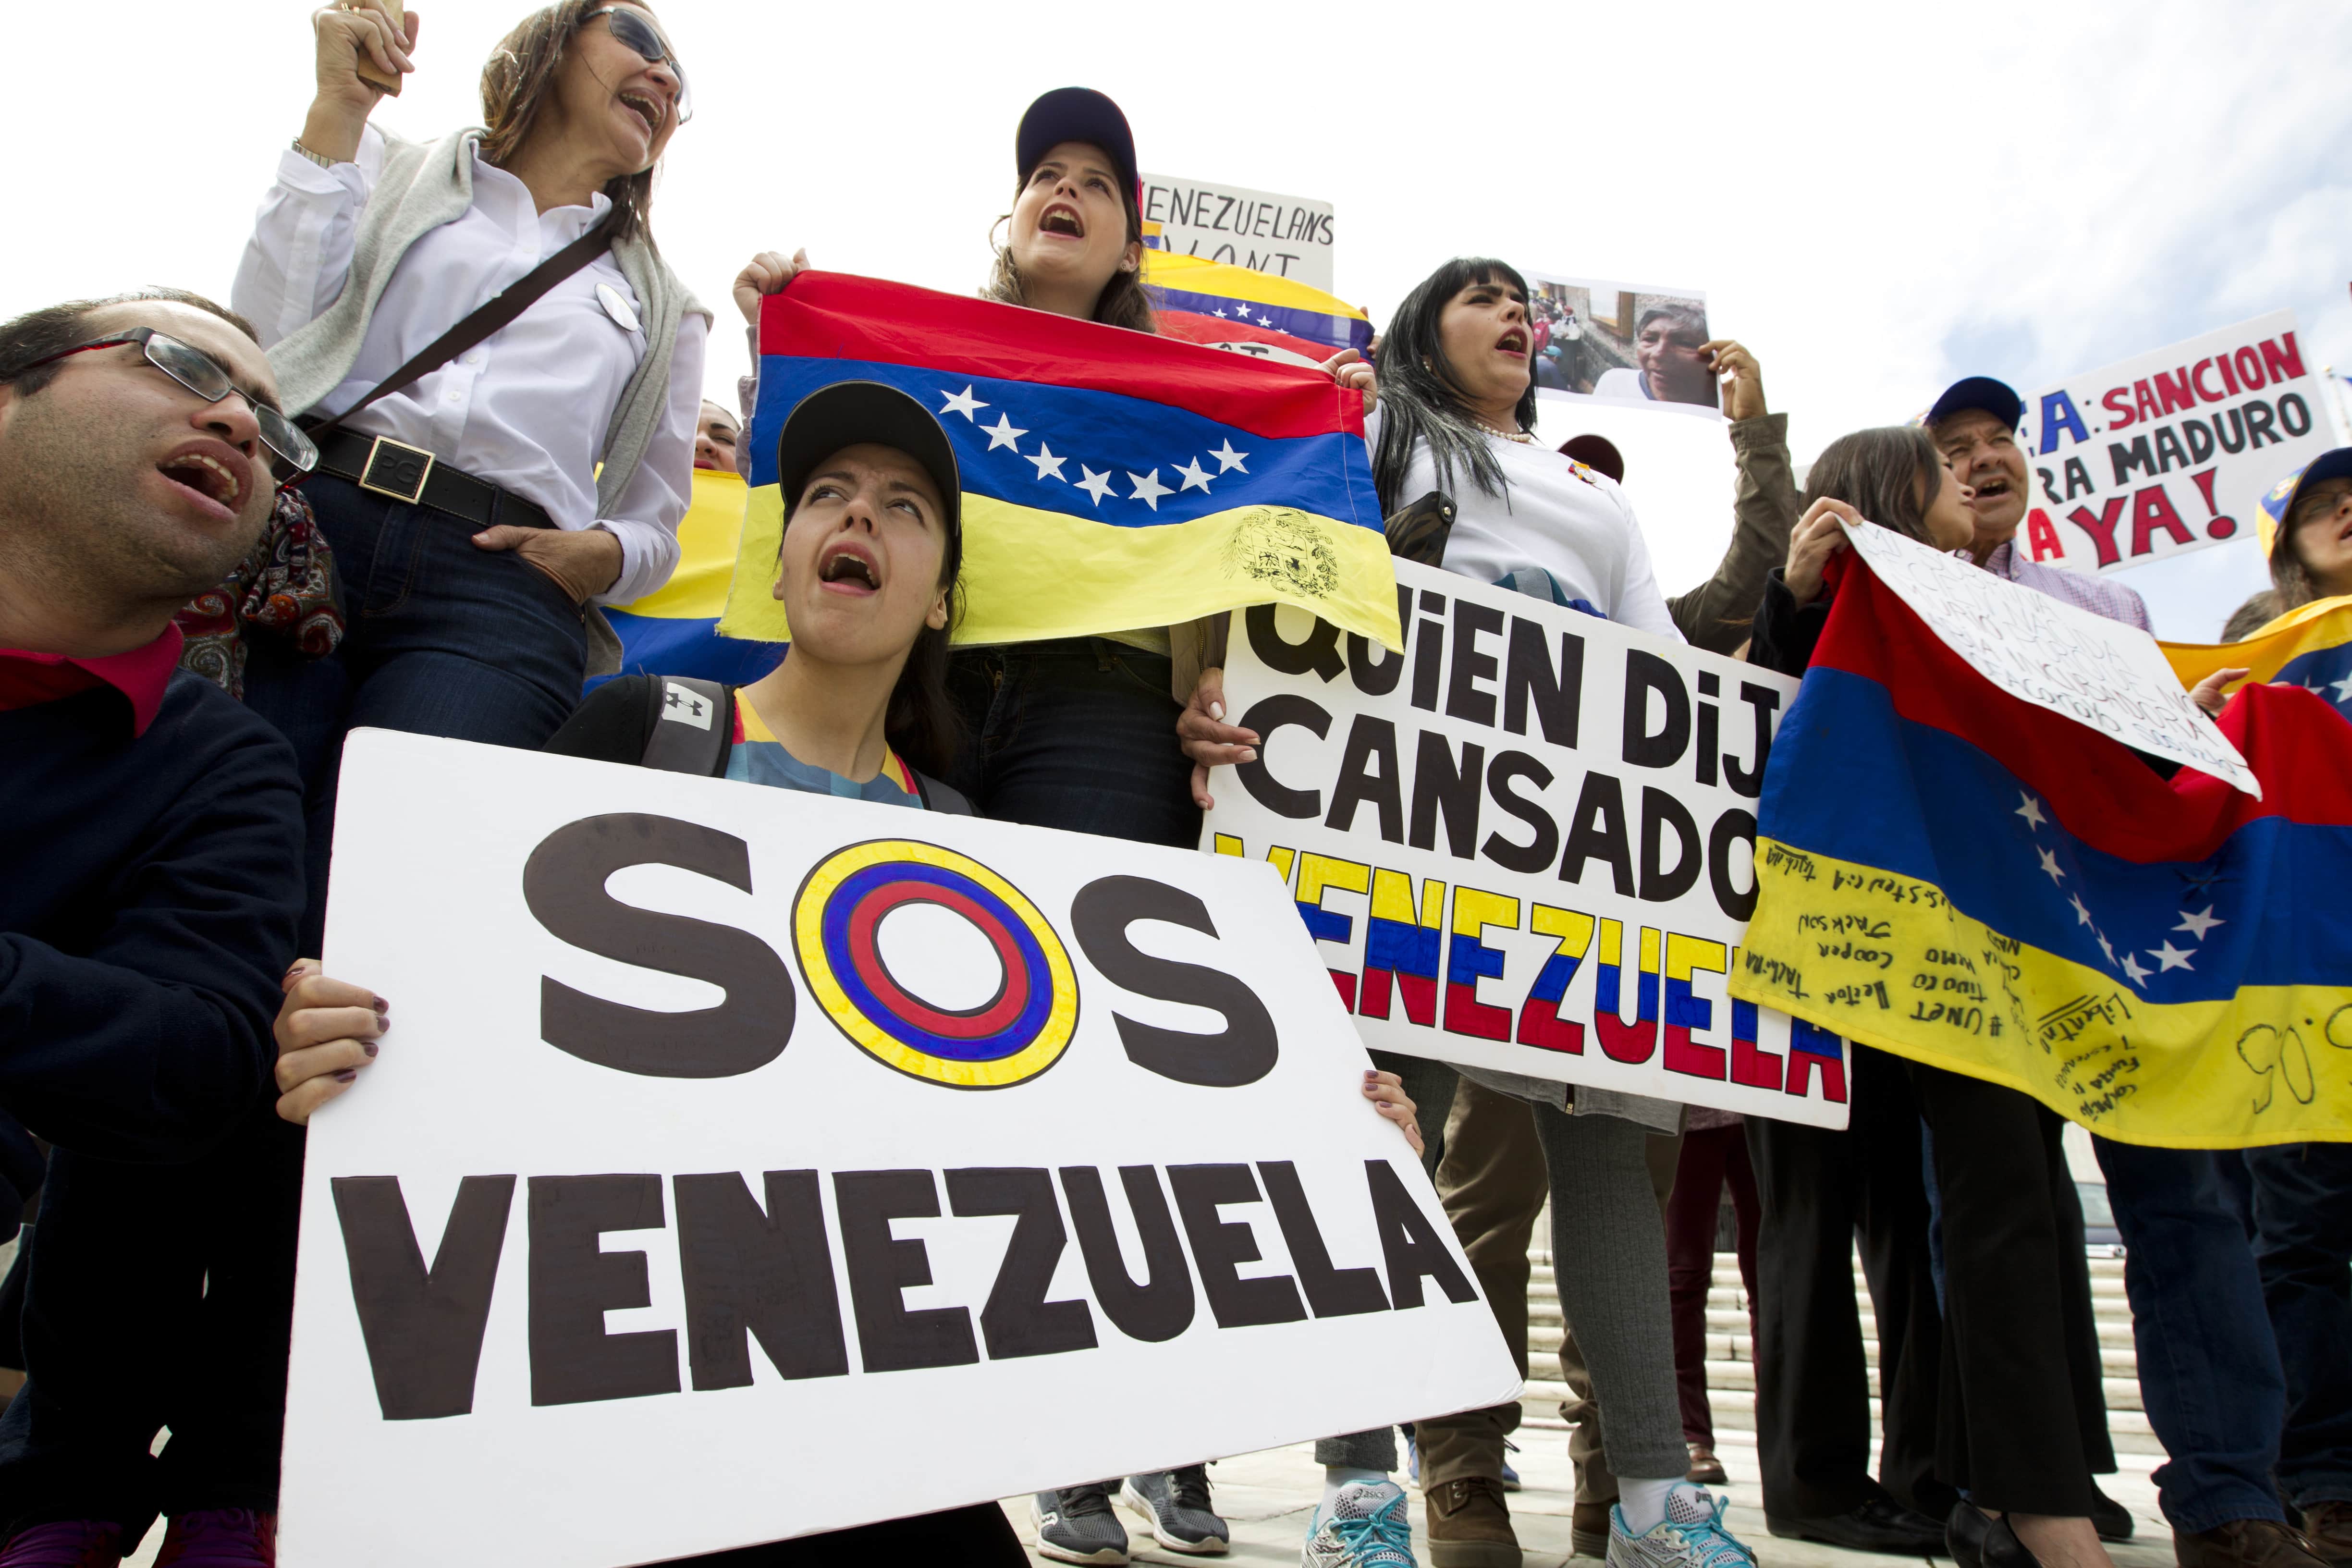 Demonstrators who oppose the Venezuelan government chant outside the Organization of American States (OAS) during a special meeting of the Permanent Council, in Washington, 3 April 2017, AP Foto/José Luis Magana